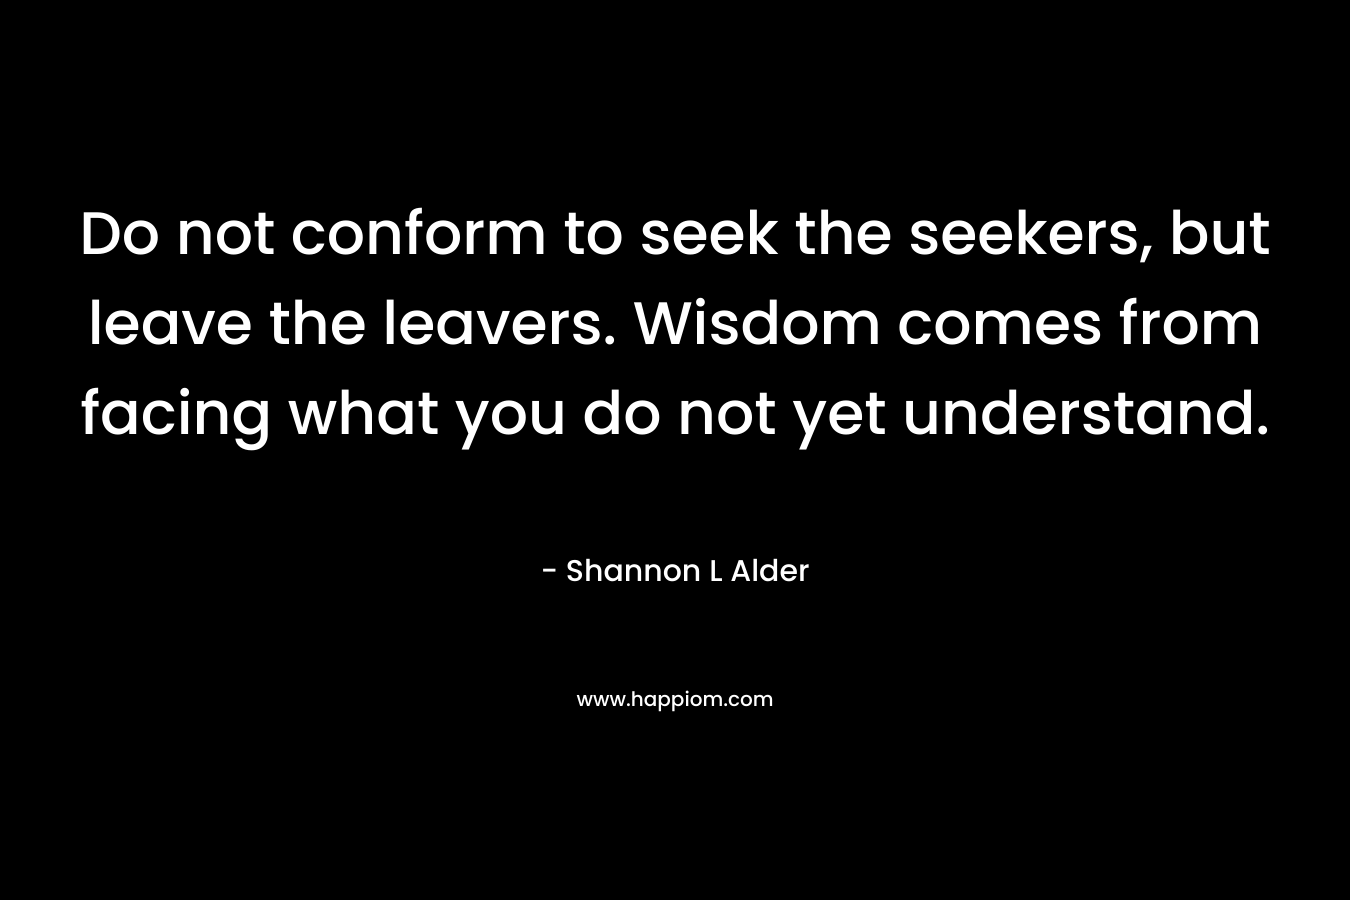 Do not conform to seek the seekers, but leave the leavers. Wisdom comes from facing what you do not yet understand.